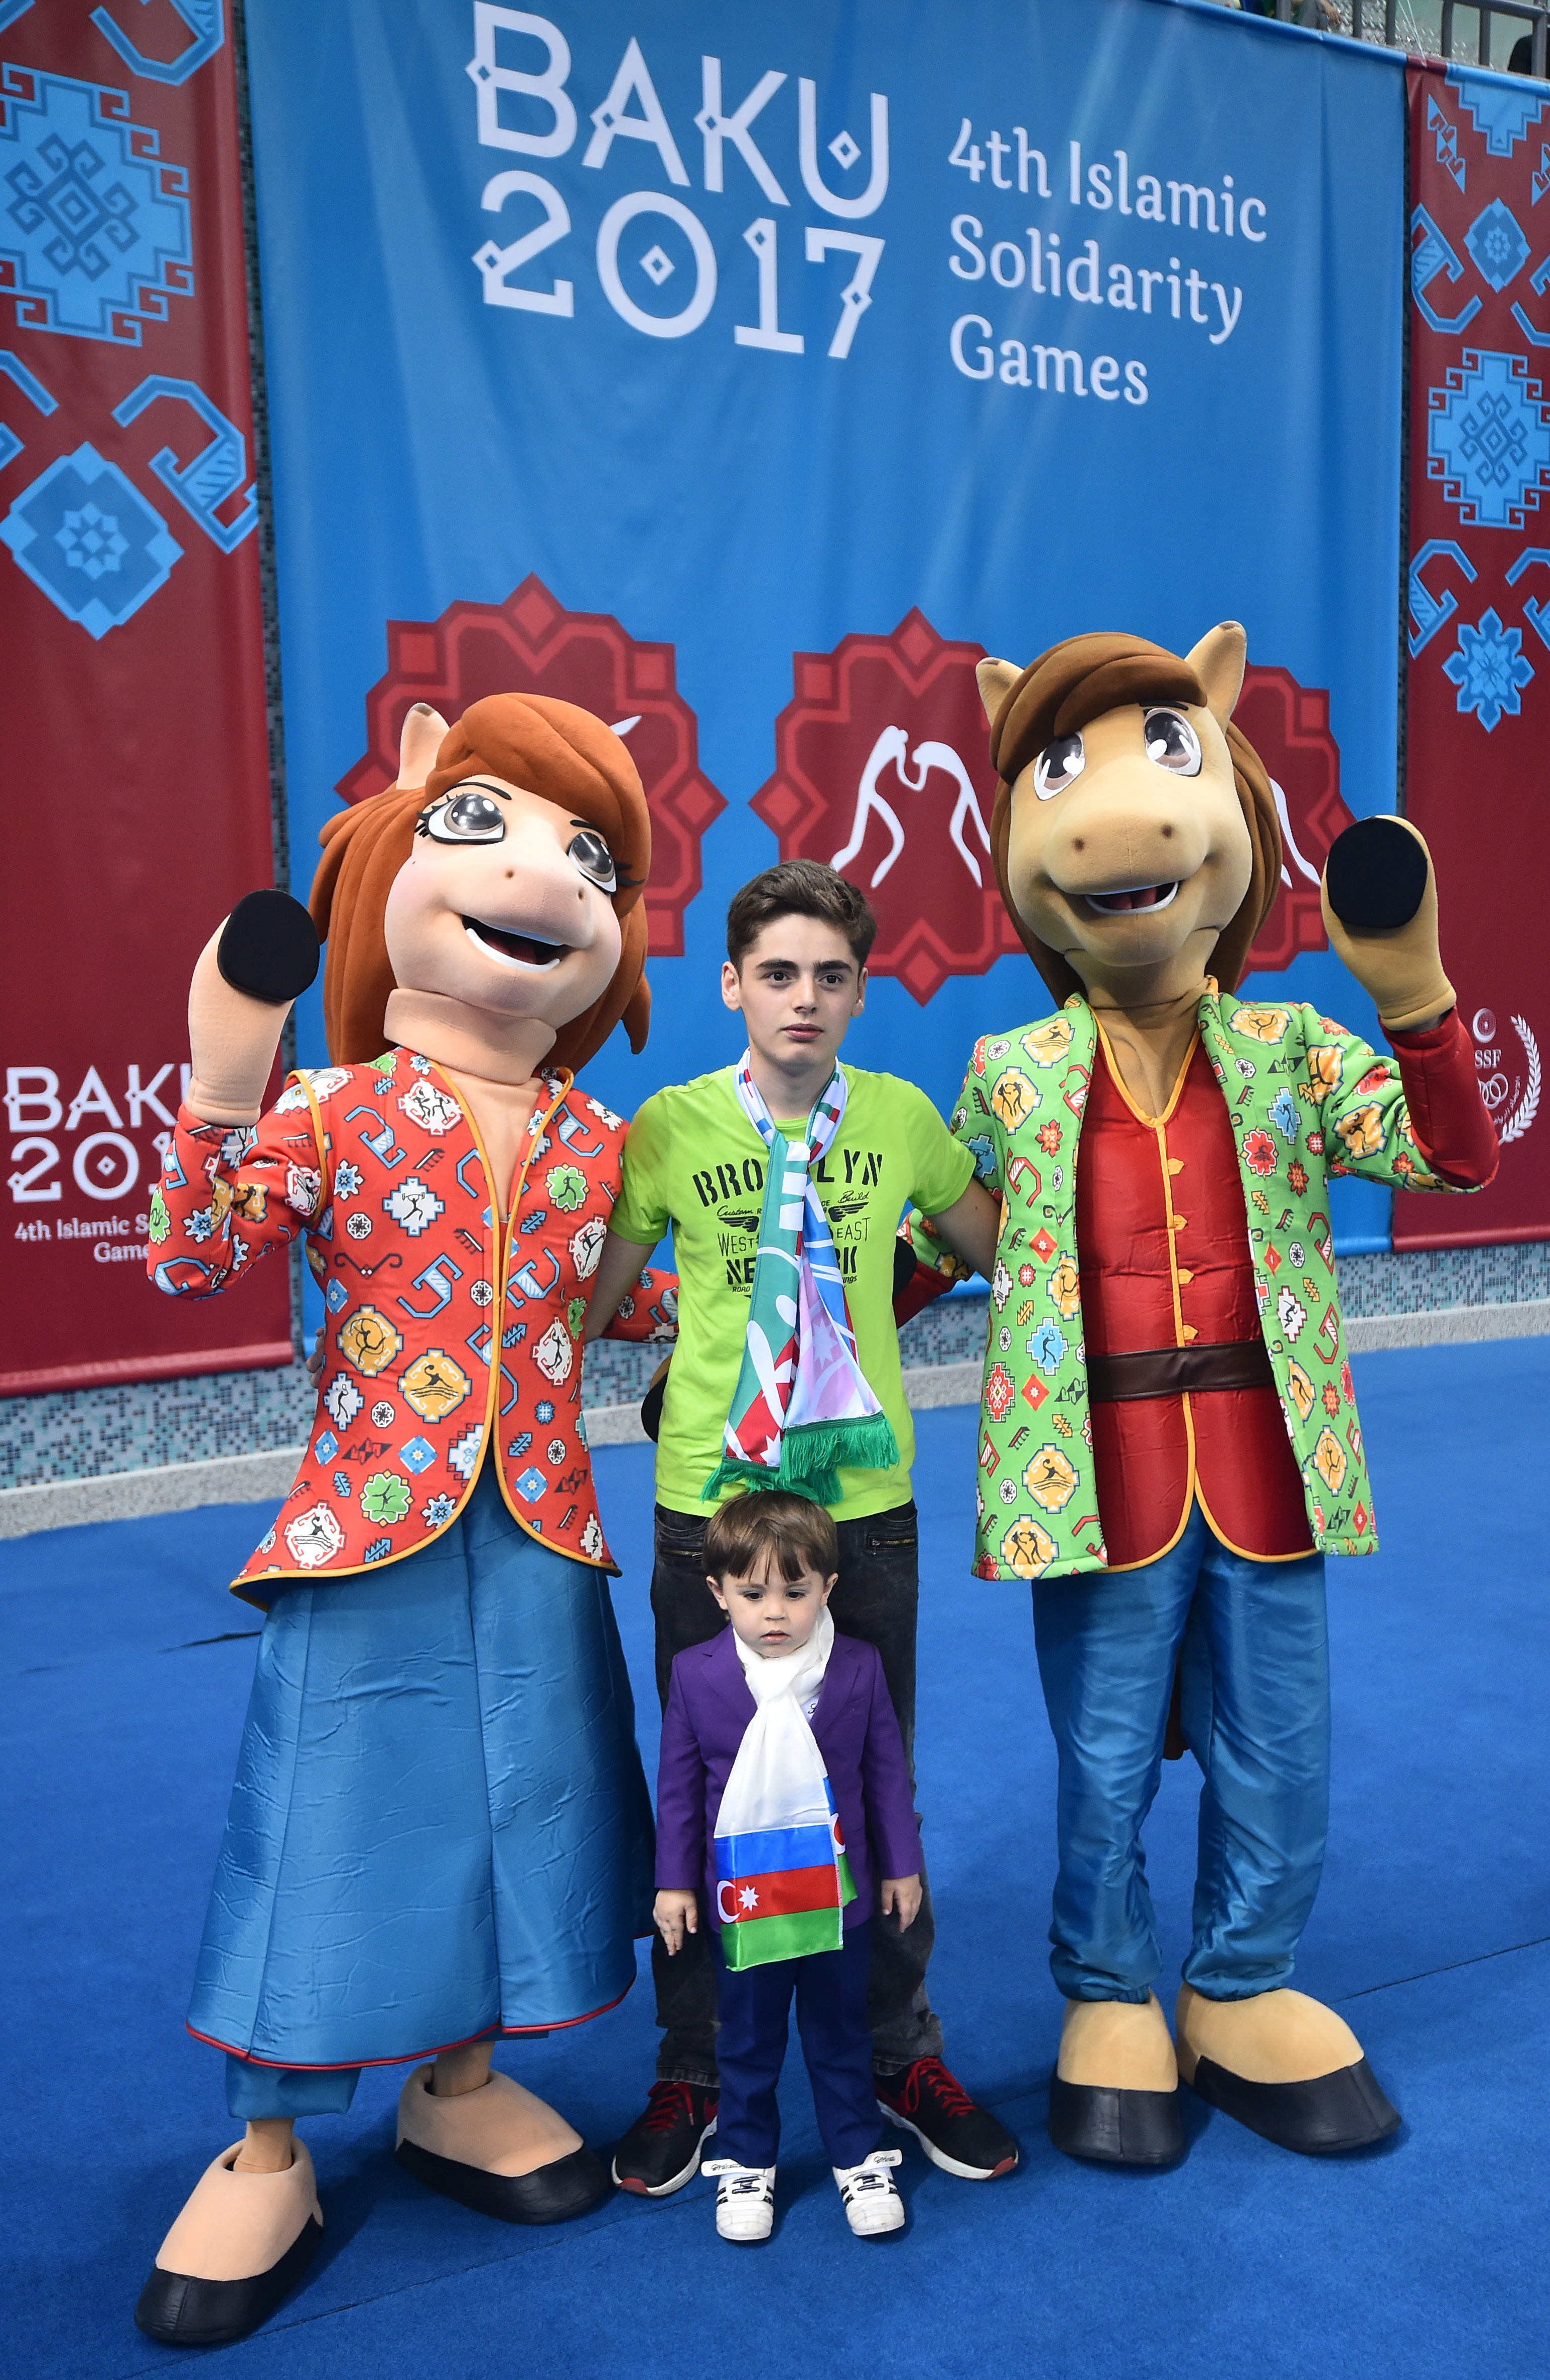 Baku 2017 4th Islamic Solidarity Games' mascots pose with spectators at the Sarhadchi Sports Olympic Center, in Baku, on May 14, 2017.